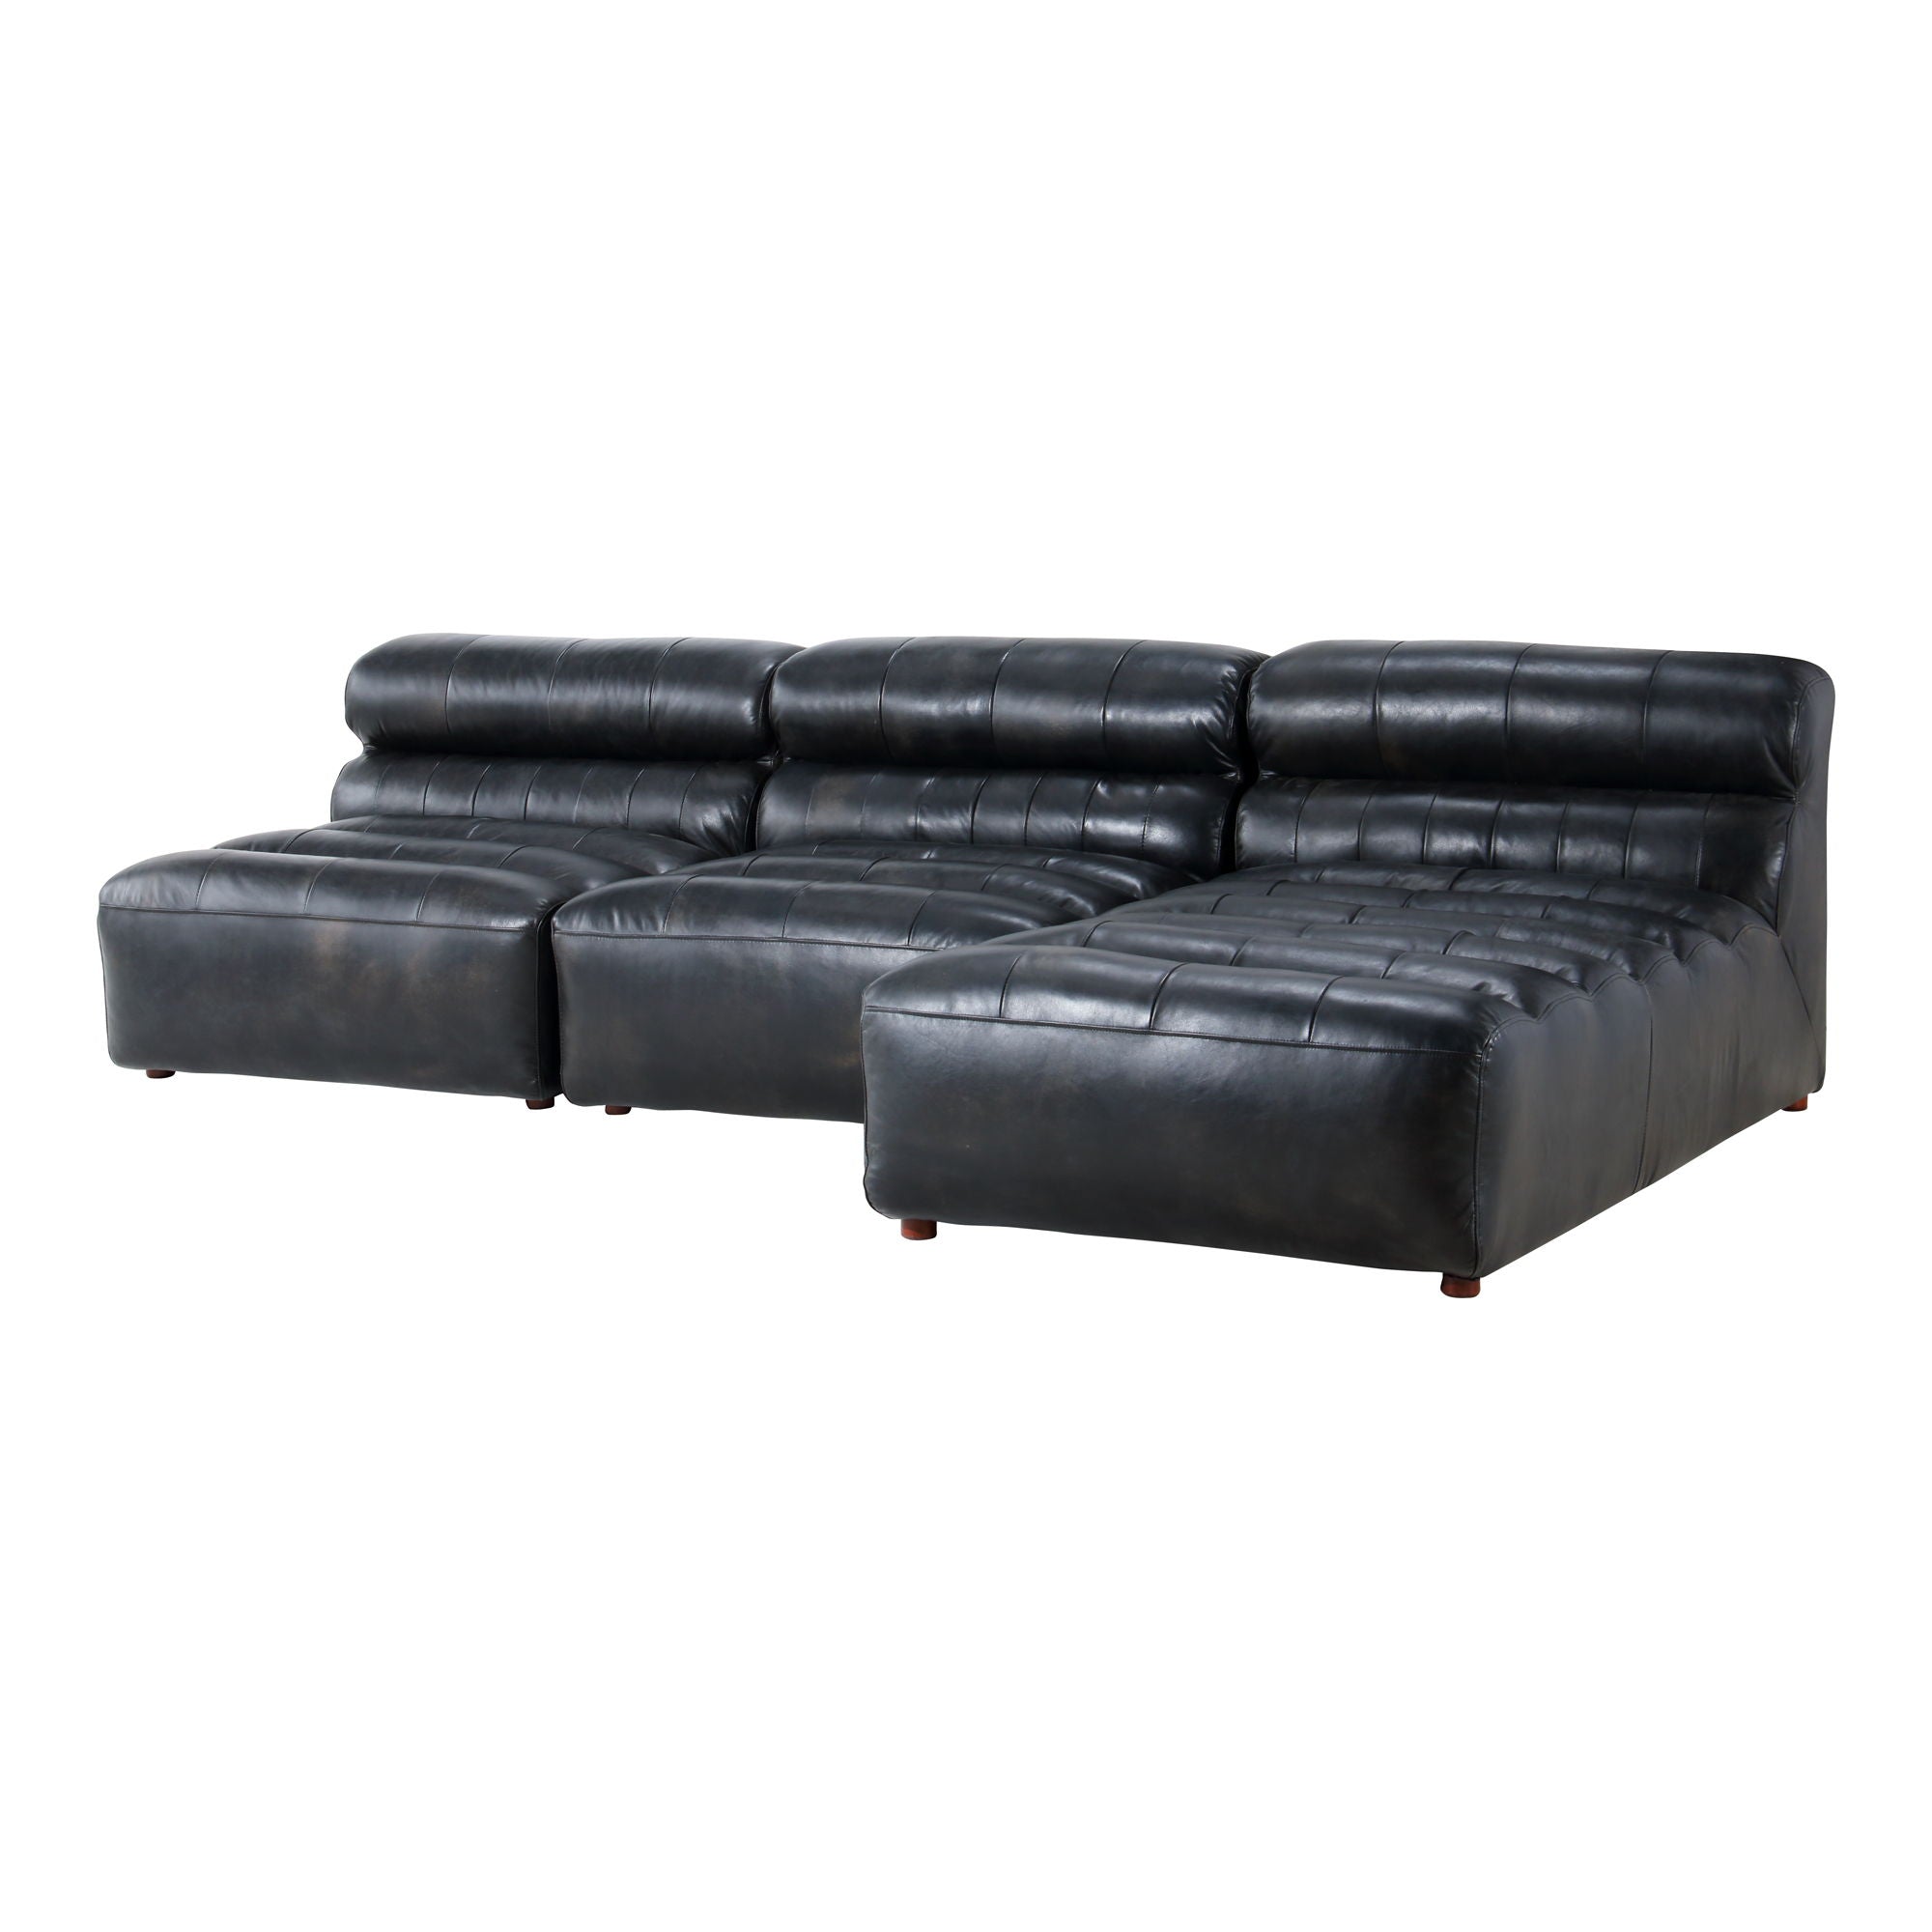 Ramsay Signature Modular Leather Sectional - Antique Black - Comfort-Driven Design - Stylish Living Room Furniture